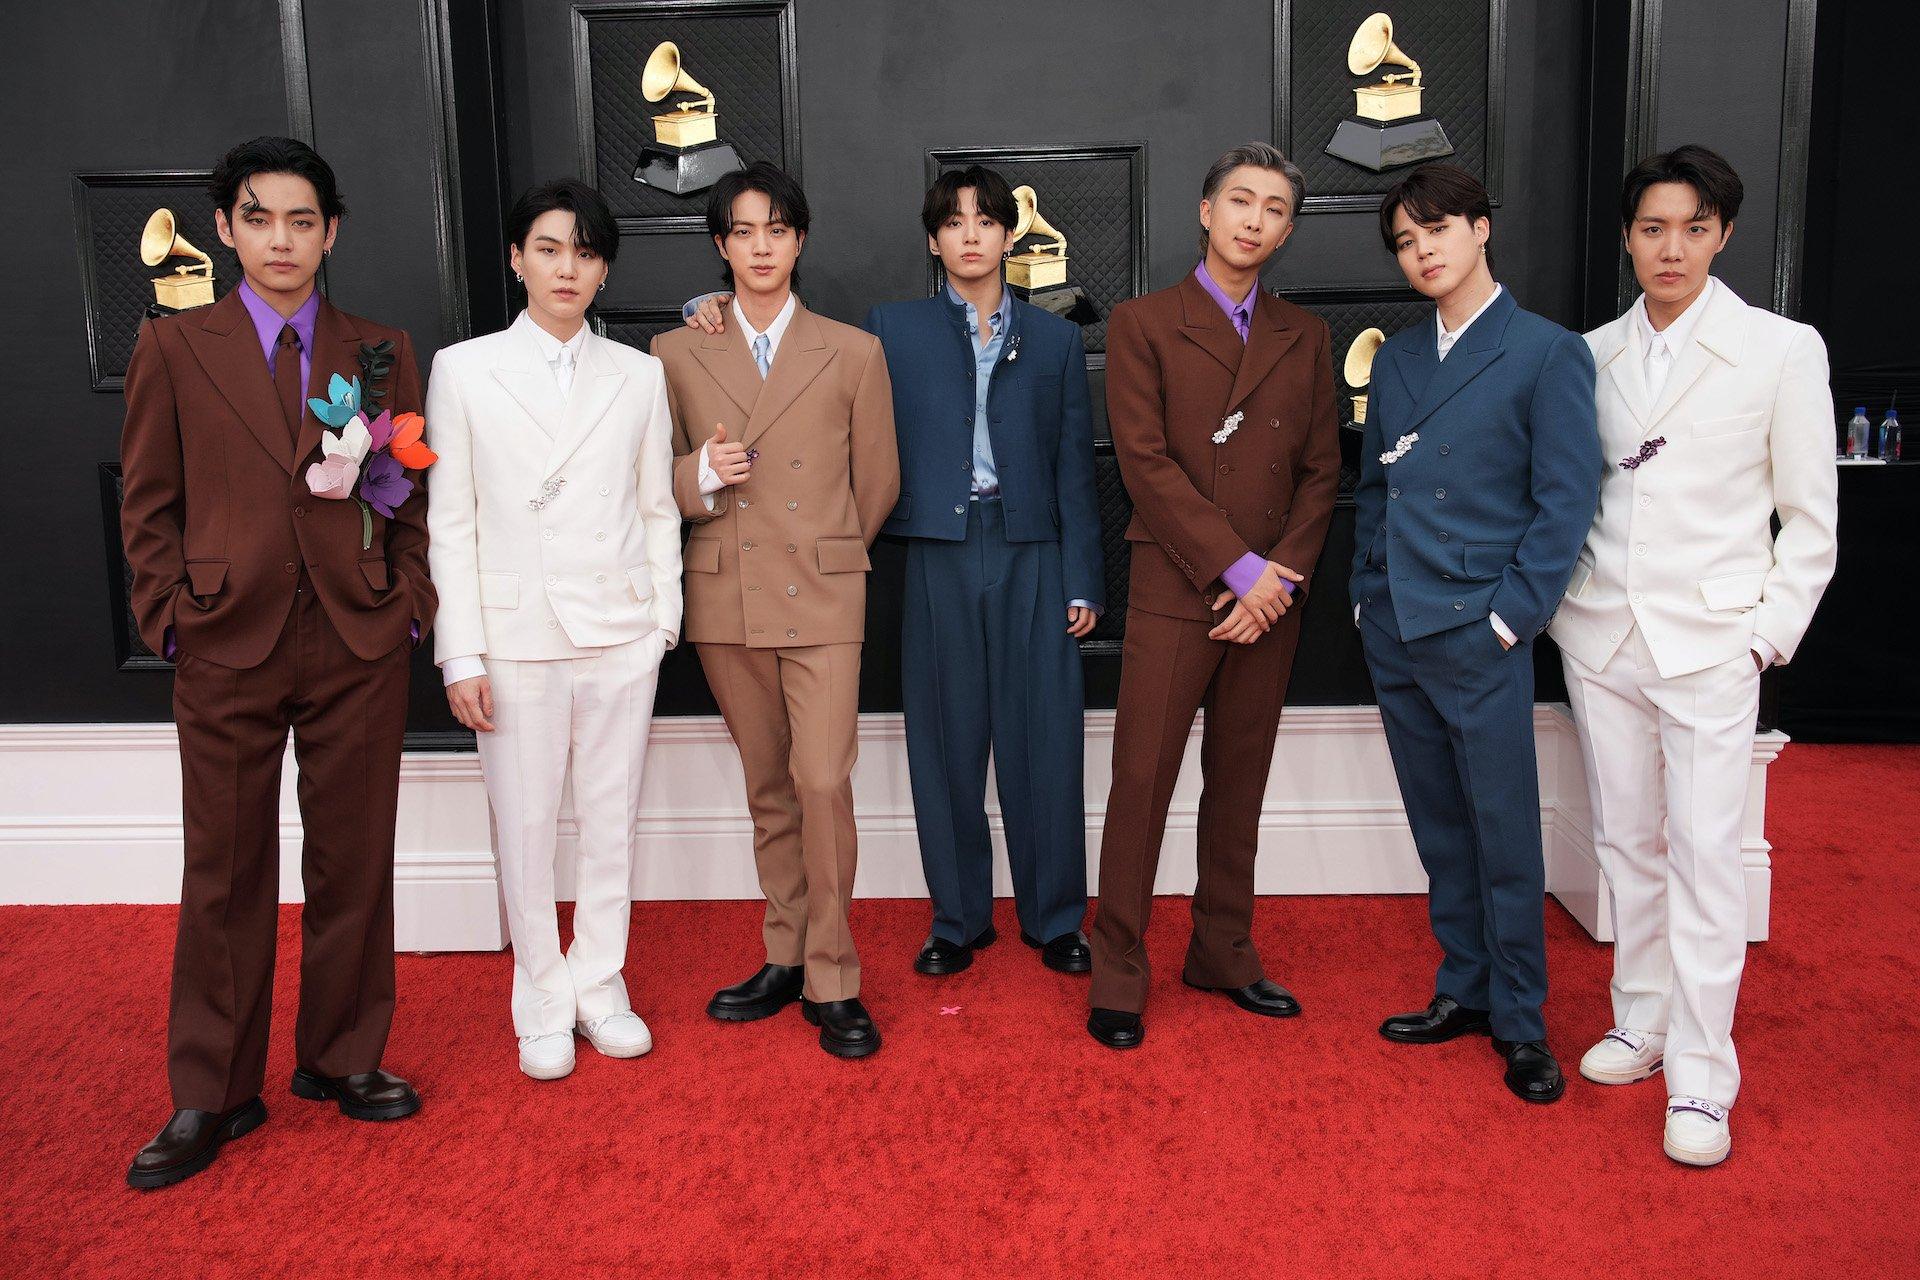 Grammys 2022: All the Best Looks on the Red Carpet